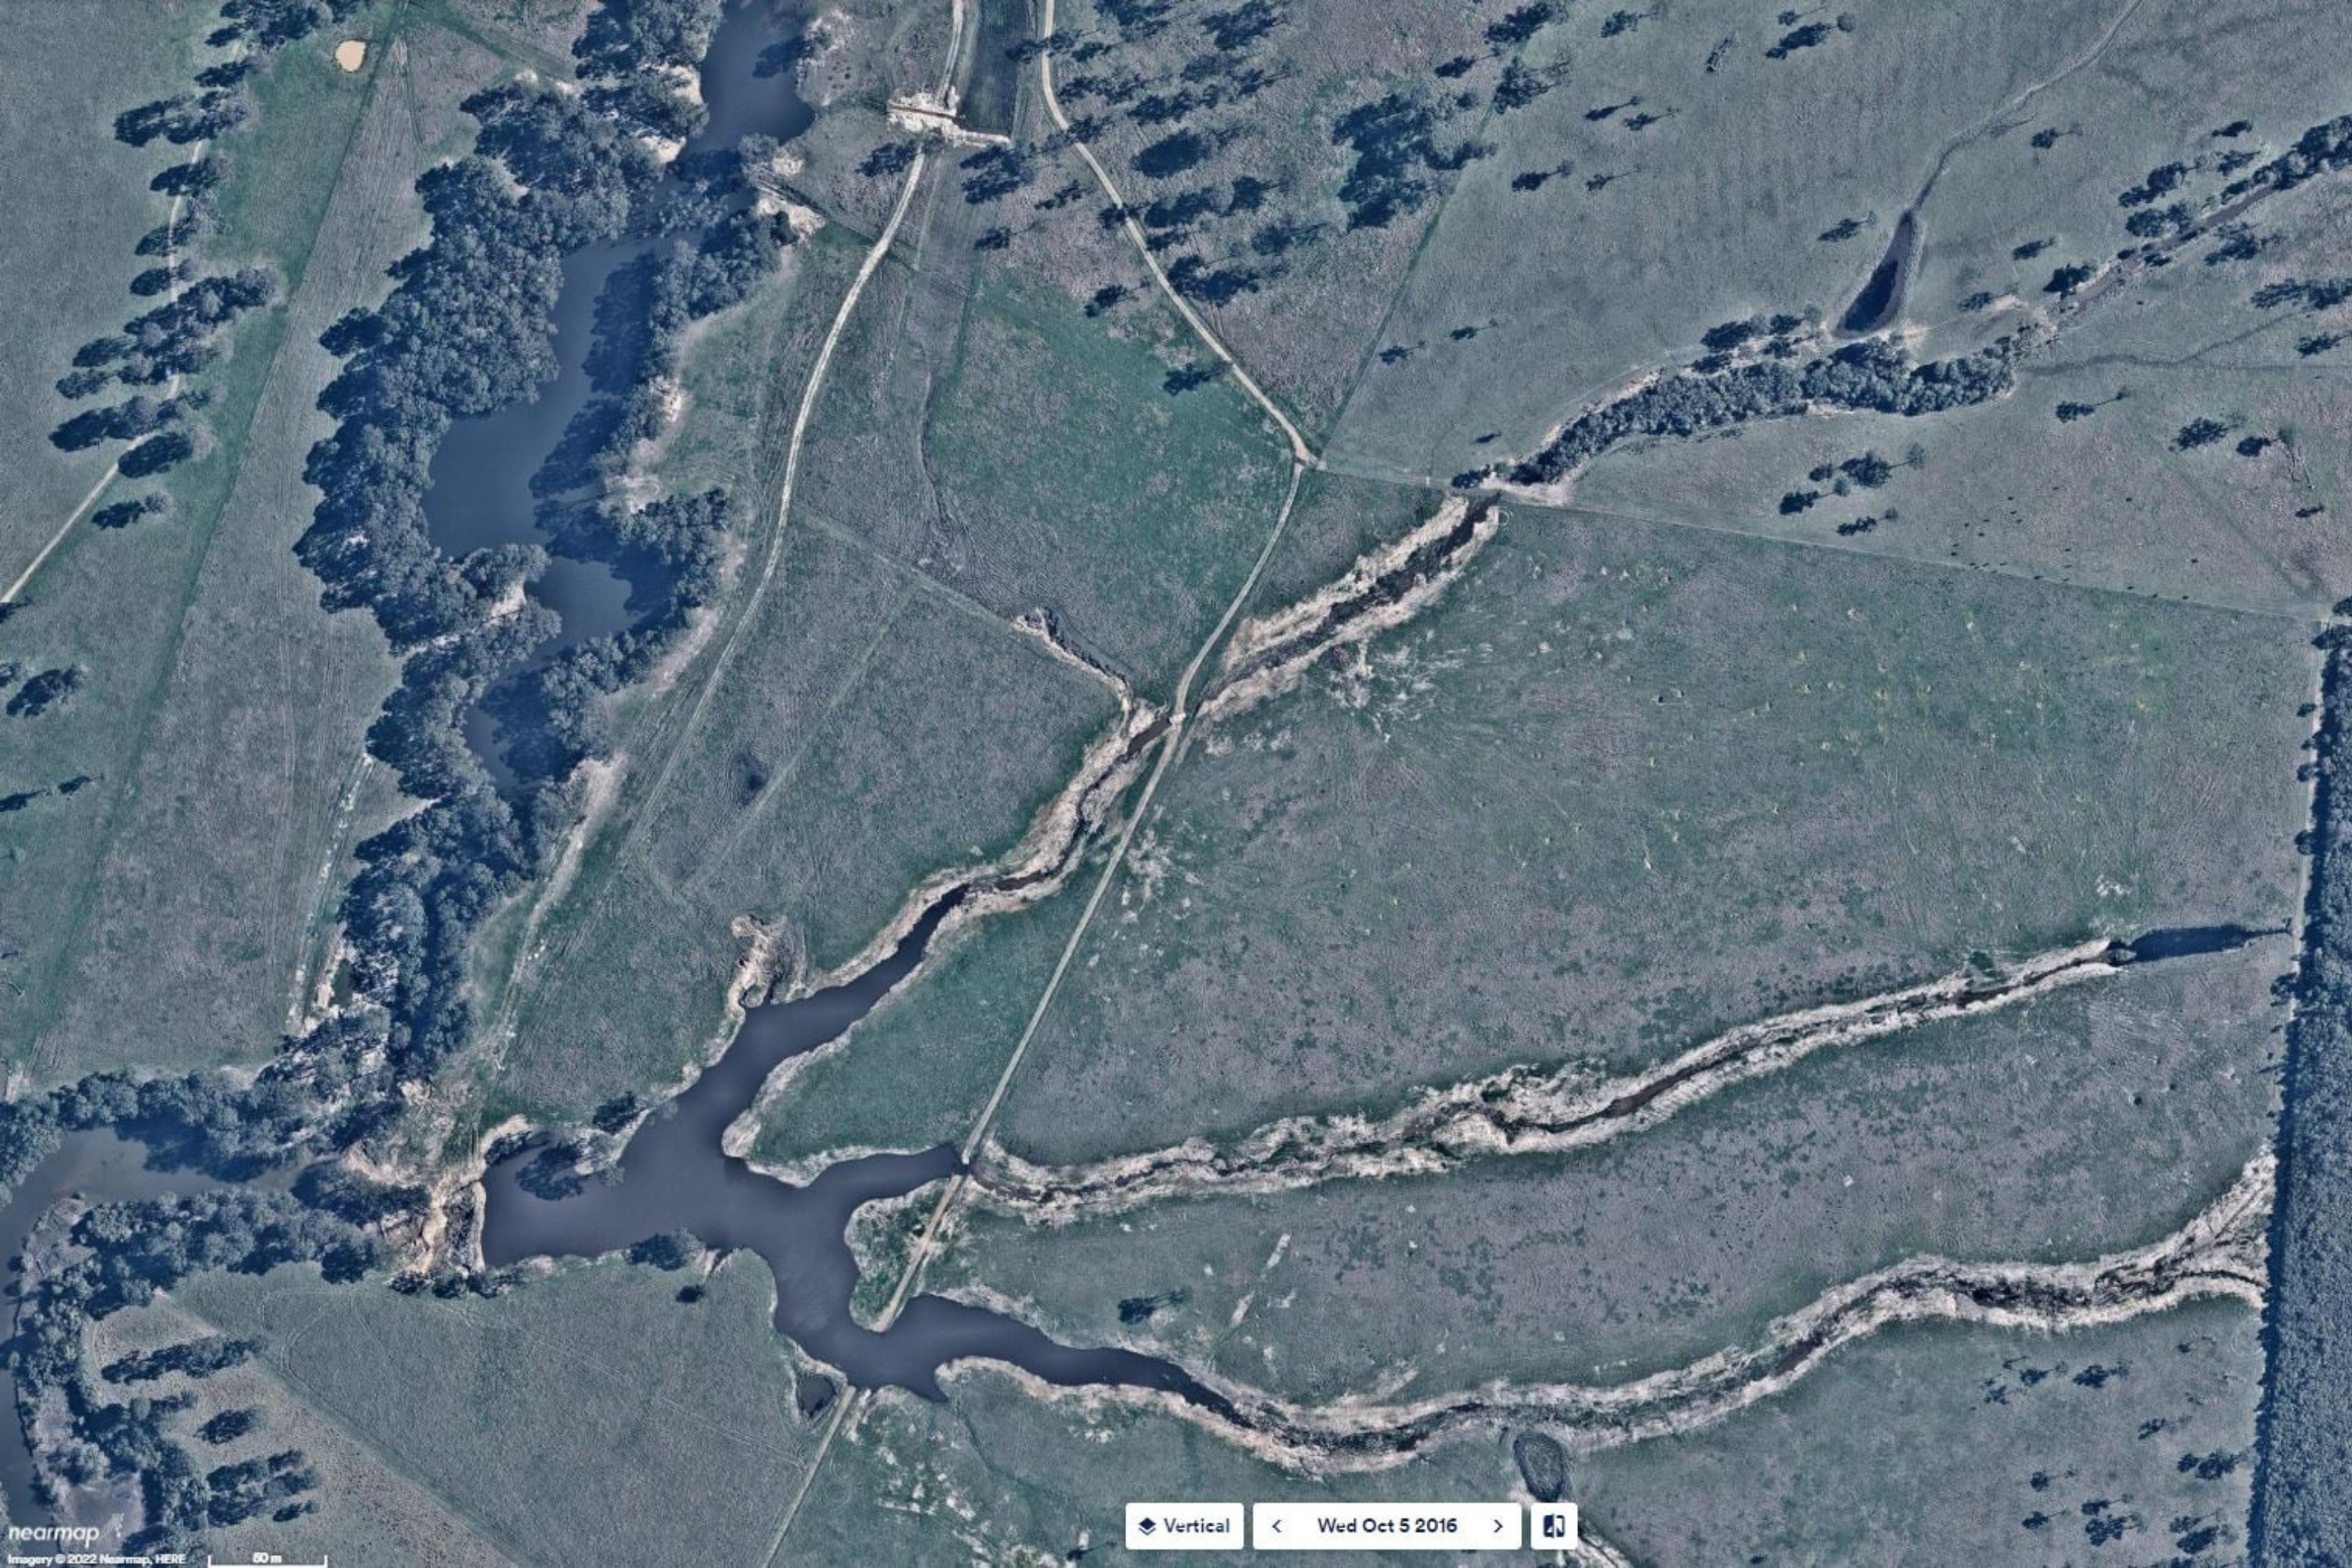 AFTER Station Creek and it's tributaries after the unauthorised dams and clearing Image by Nearmap